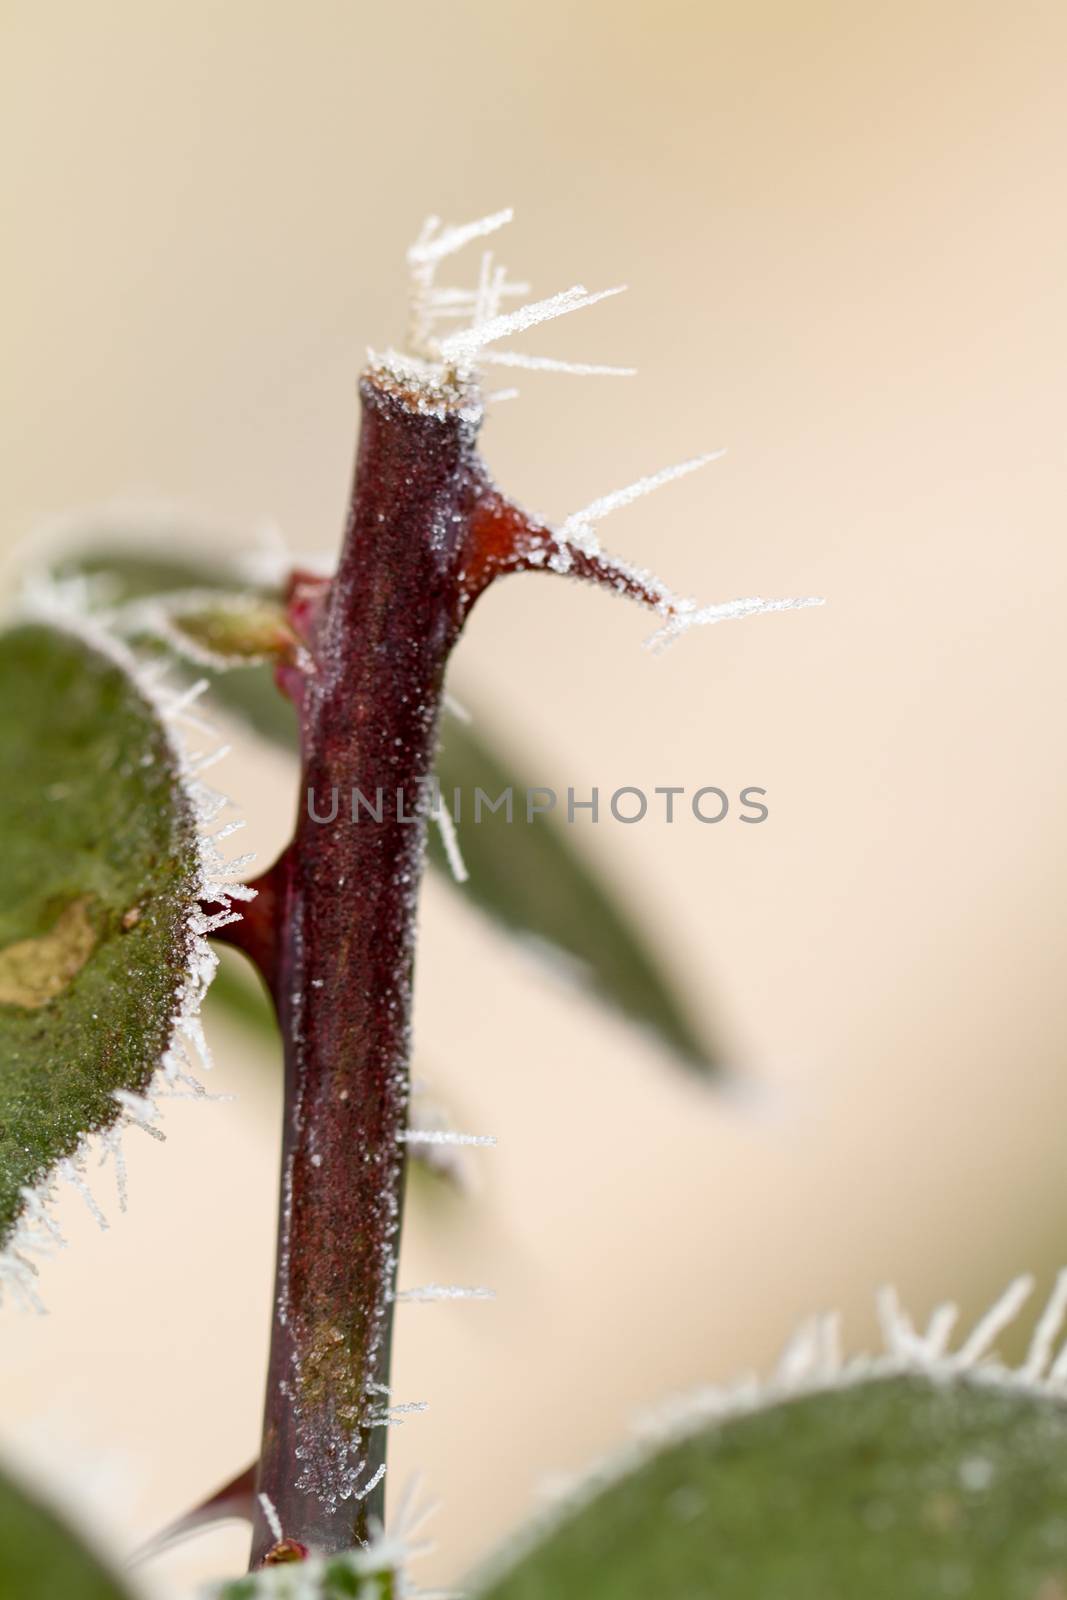 hoarfrosted rose thorn